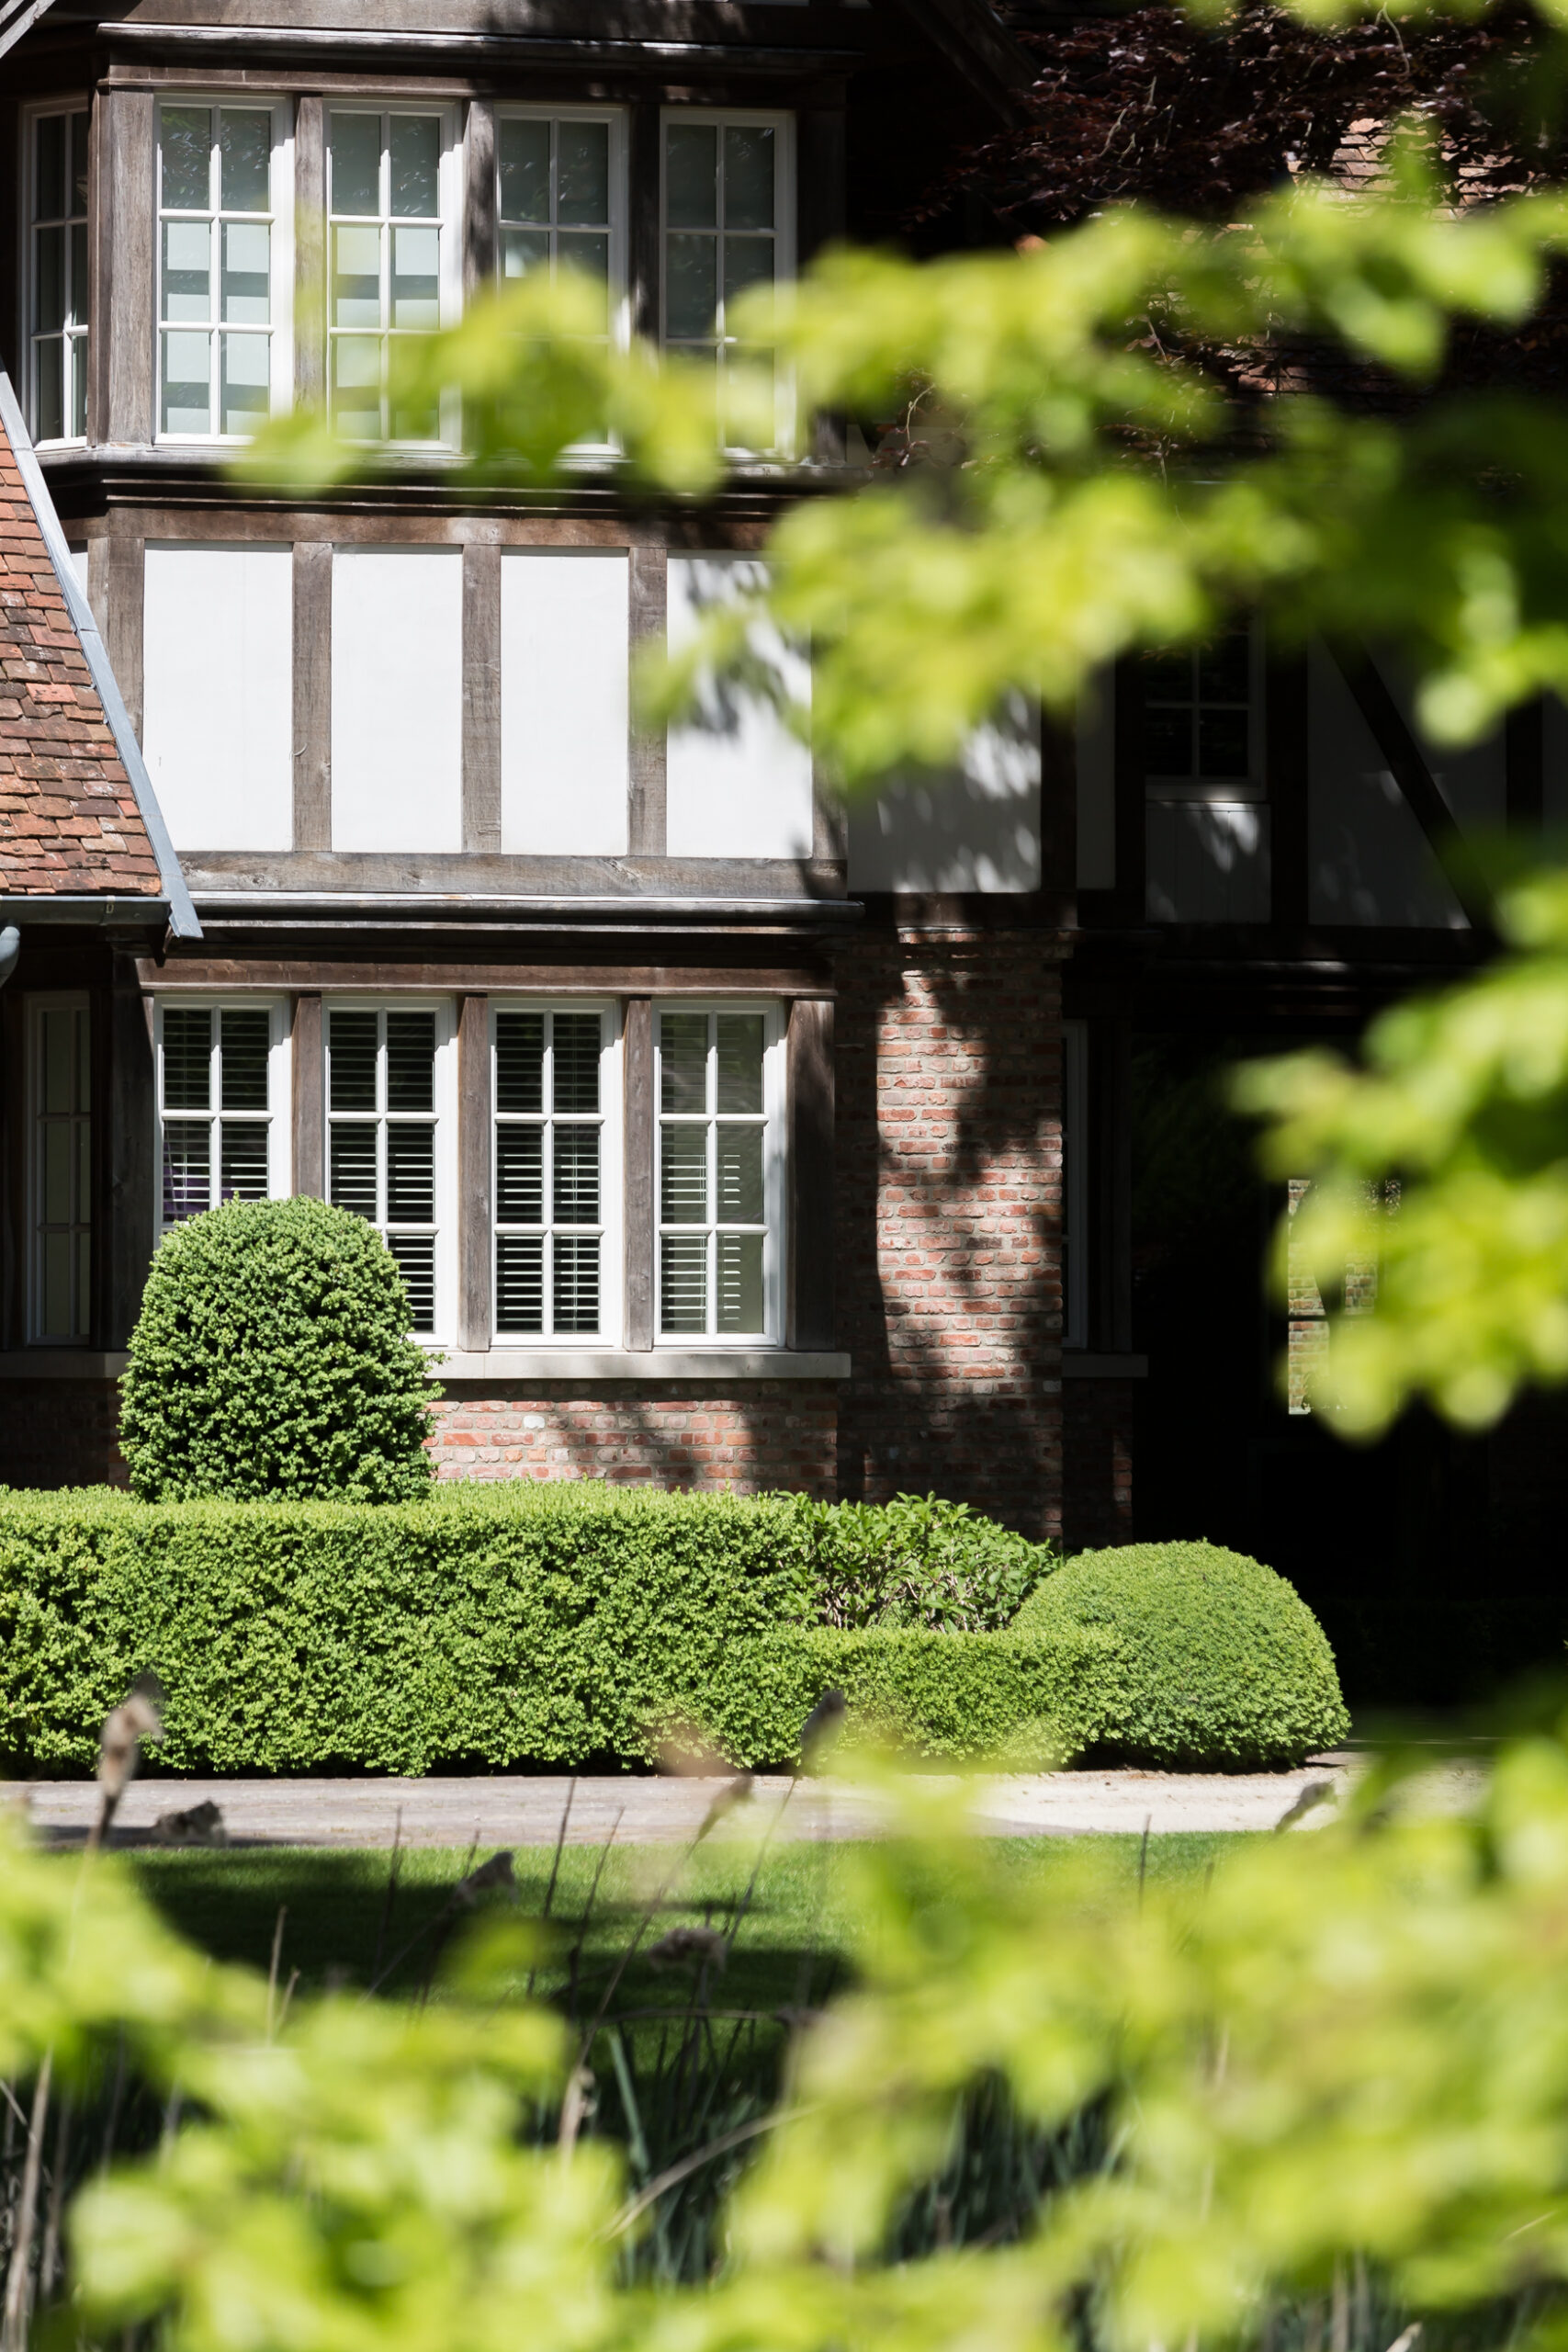 A charming view of a Tudor-style home featuring wooden beams and brickwork. The scene is framed with lush greenery, including manicured bushes in the foreground. The sunlight creates a warm ambiance, casting shadows on parts of the building.